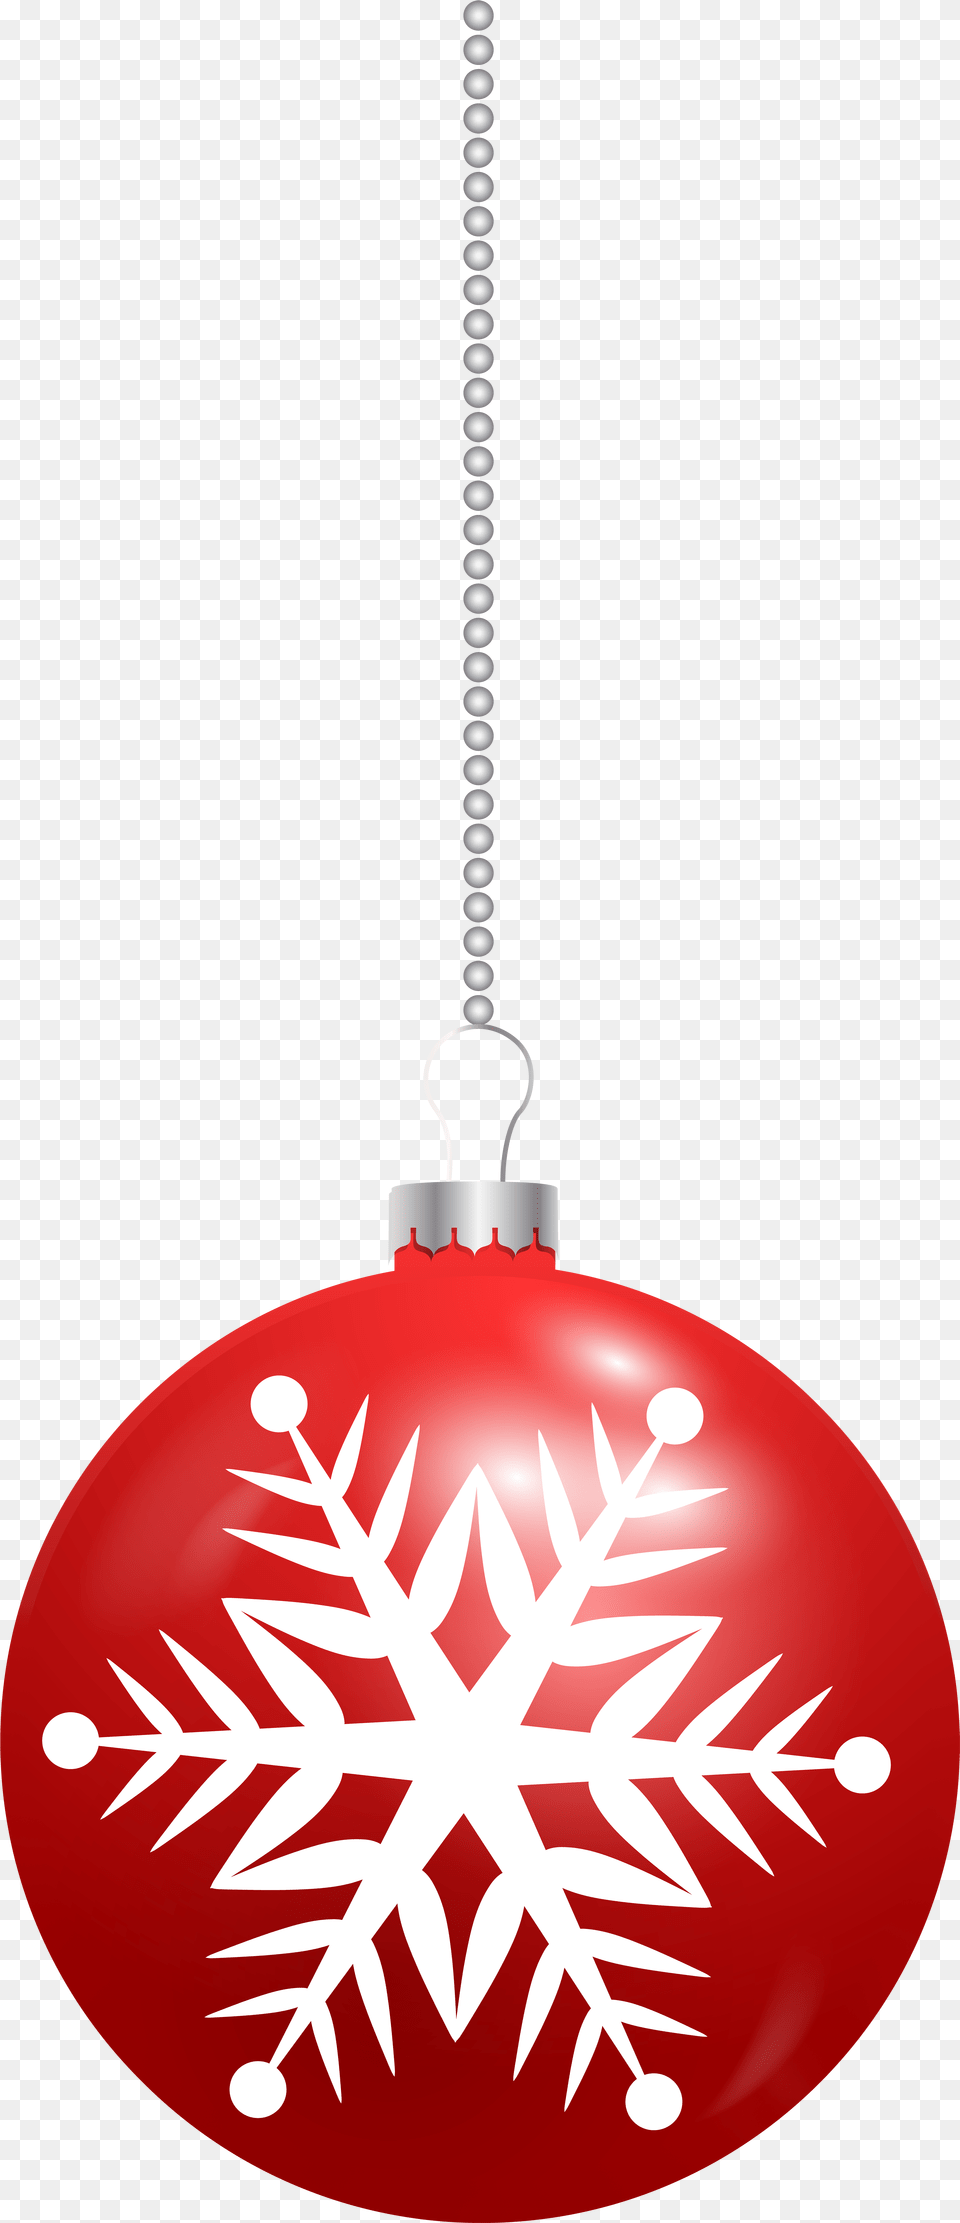 Red Snowflake Files Christmas Ball Ornament Clip Art Red, Accessories, Jewelry, Necklace Png Image